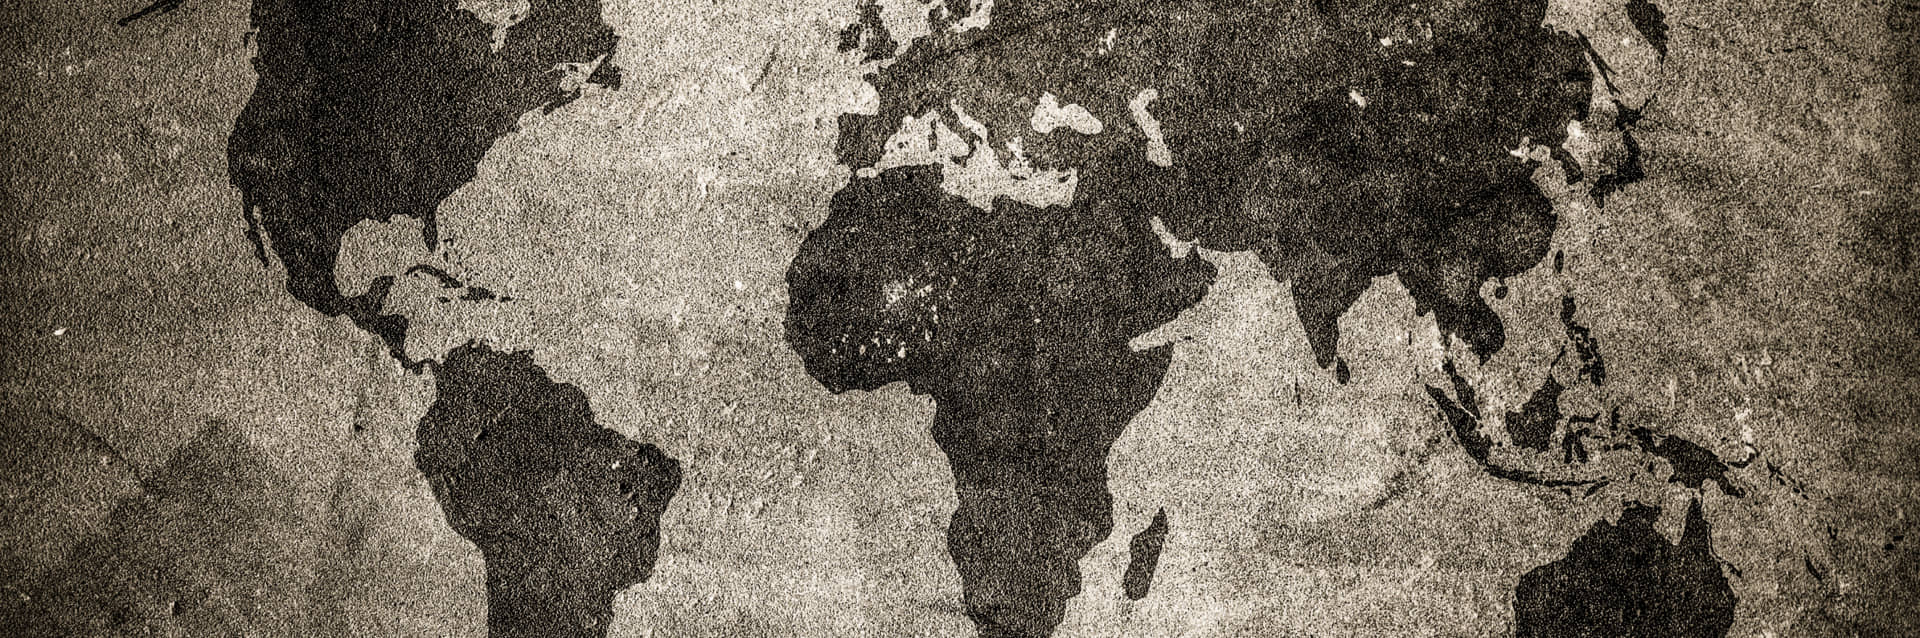 Earth: black and white outlines of the continents.